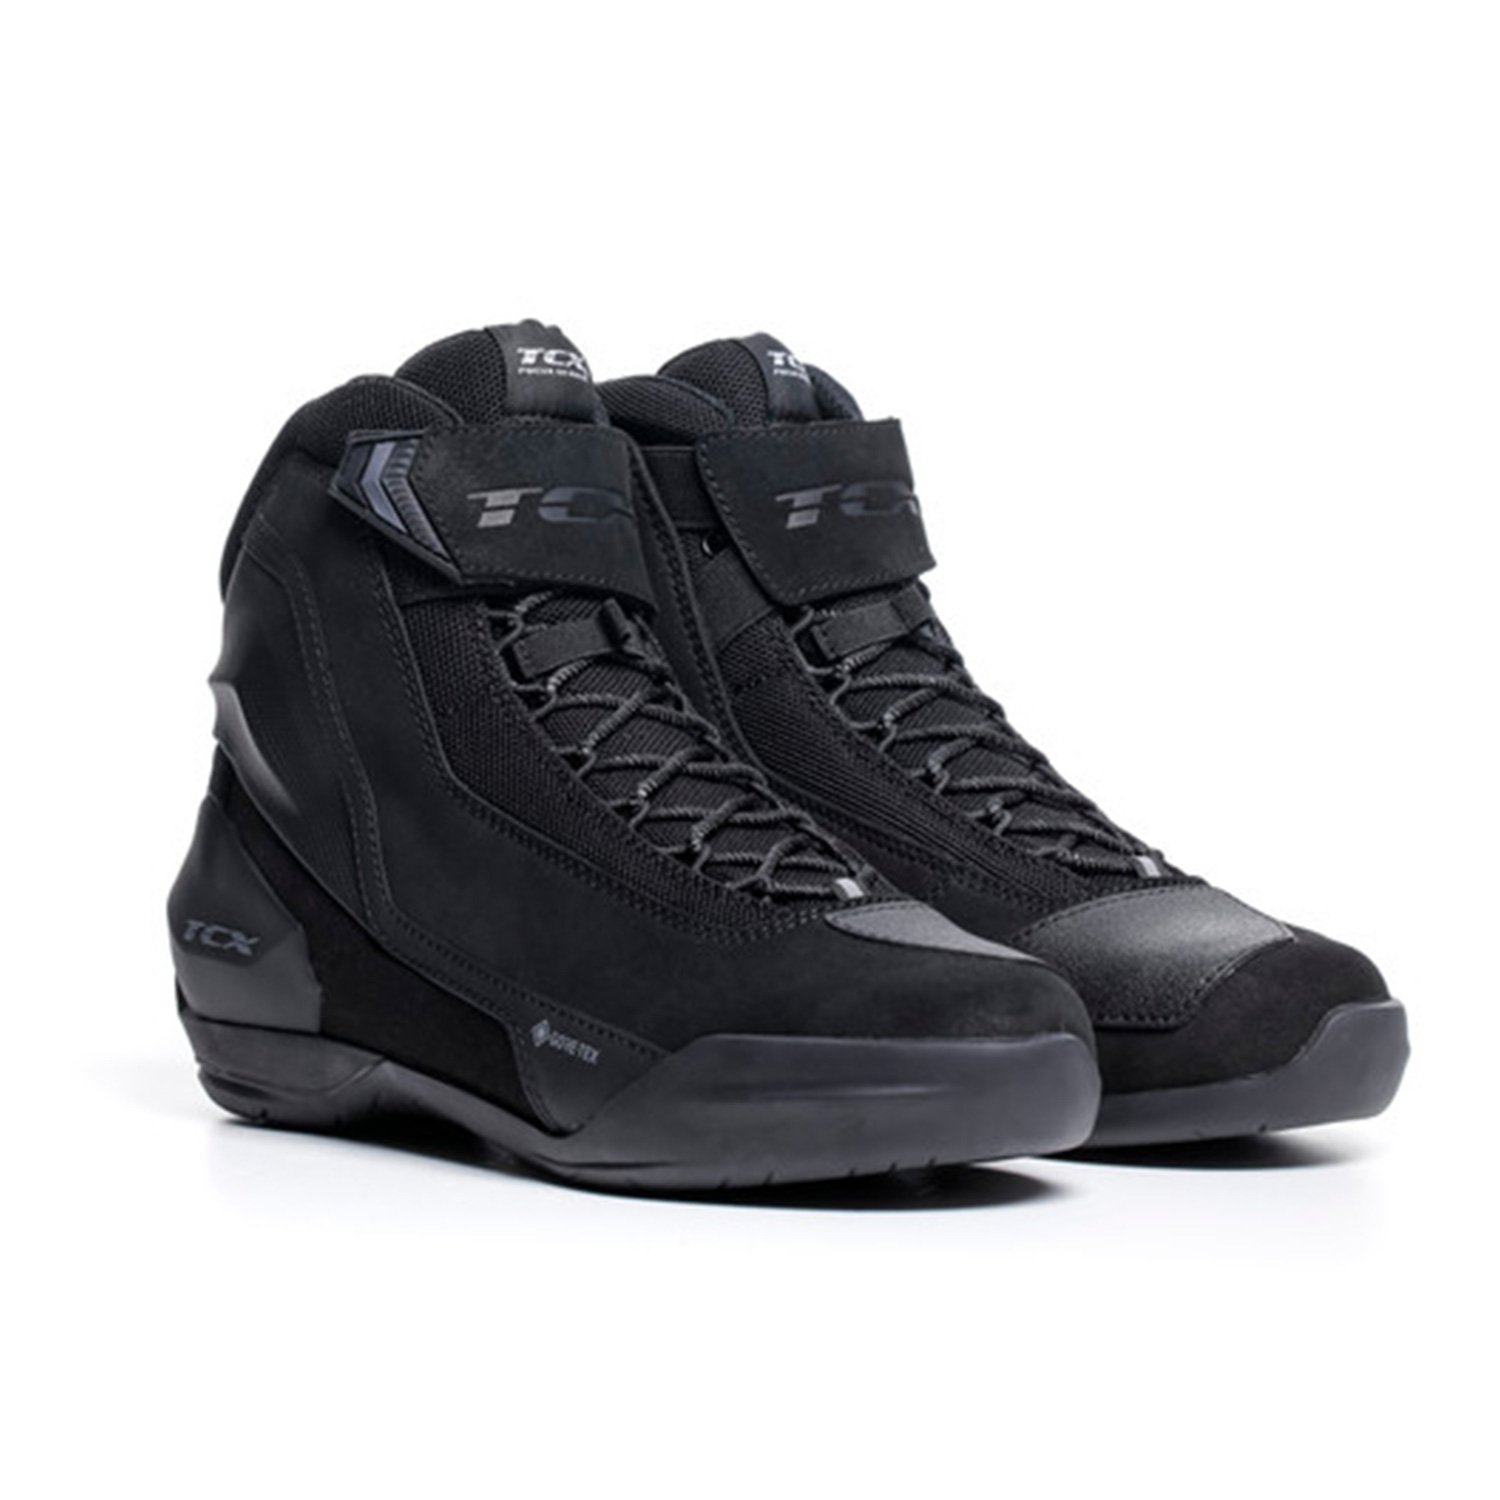 Image of TCX Jupiter 5 Gore-Tex Noir Chaussures Taille 43